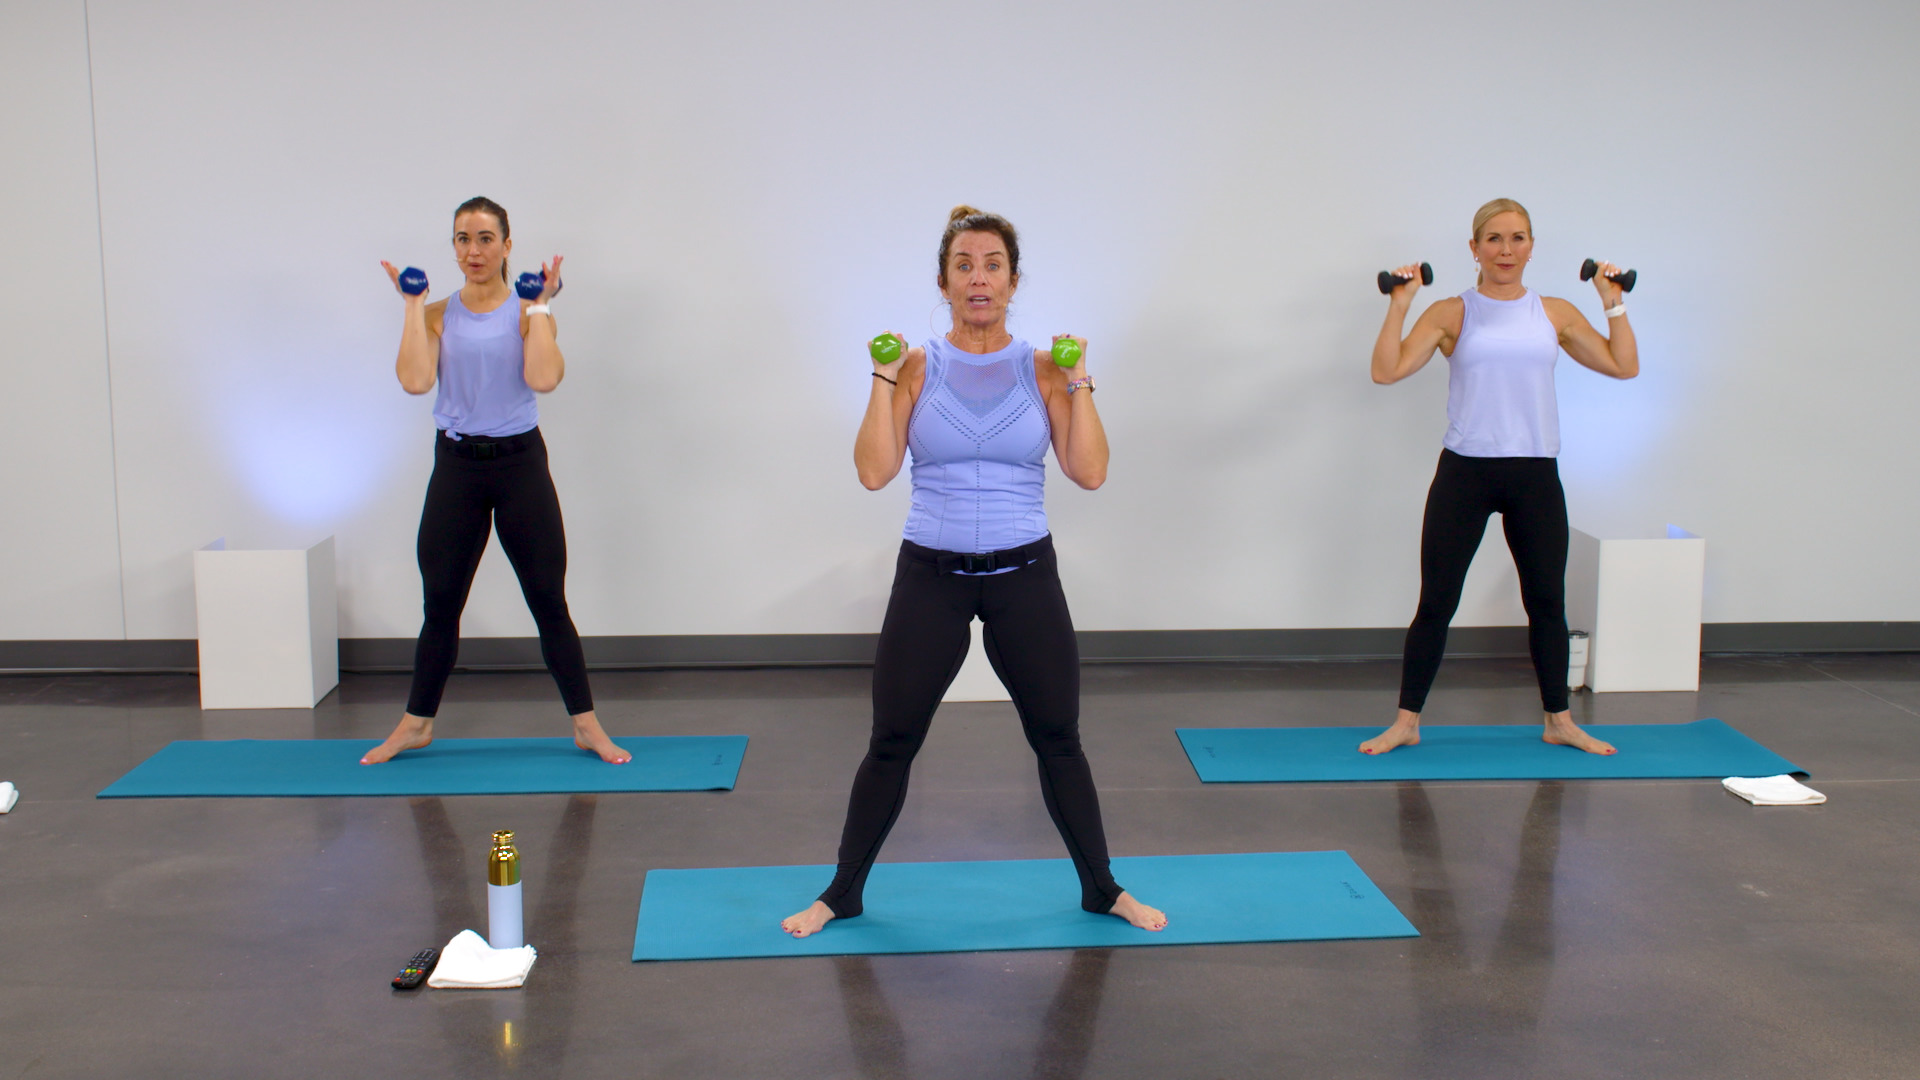 This Full-Body Barre Workout for Beginners Requires Just a Pair of Dumbbells